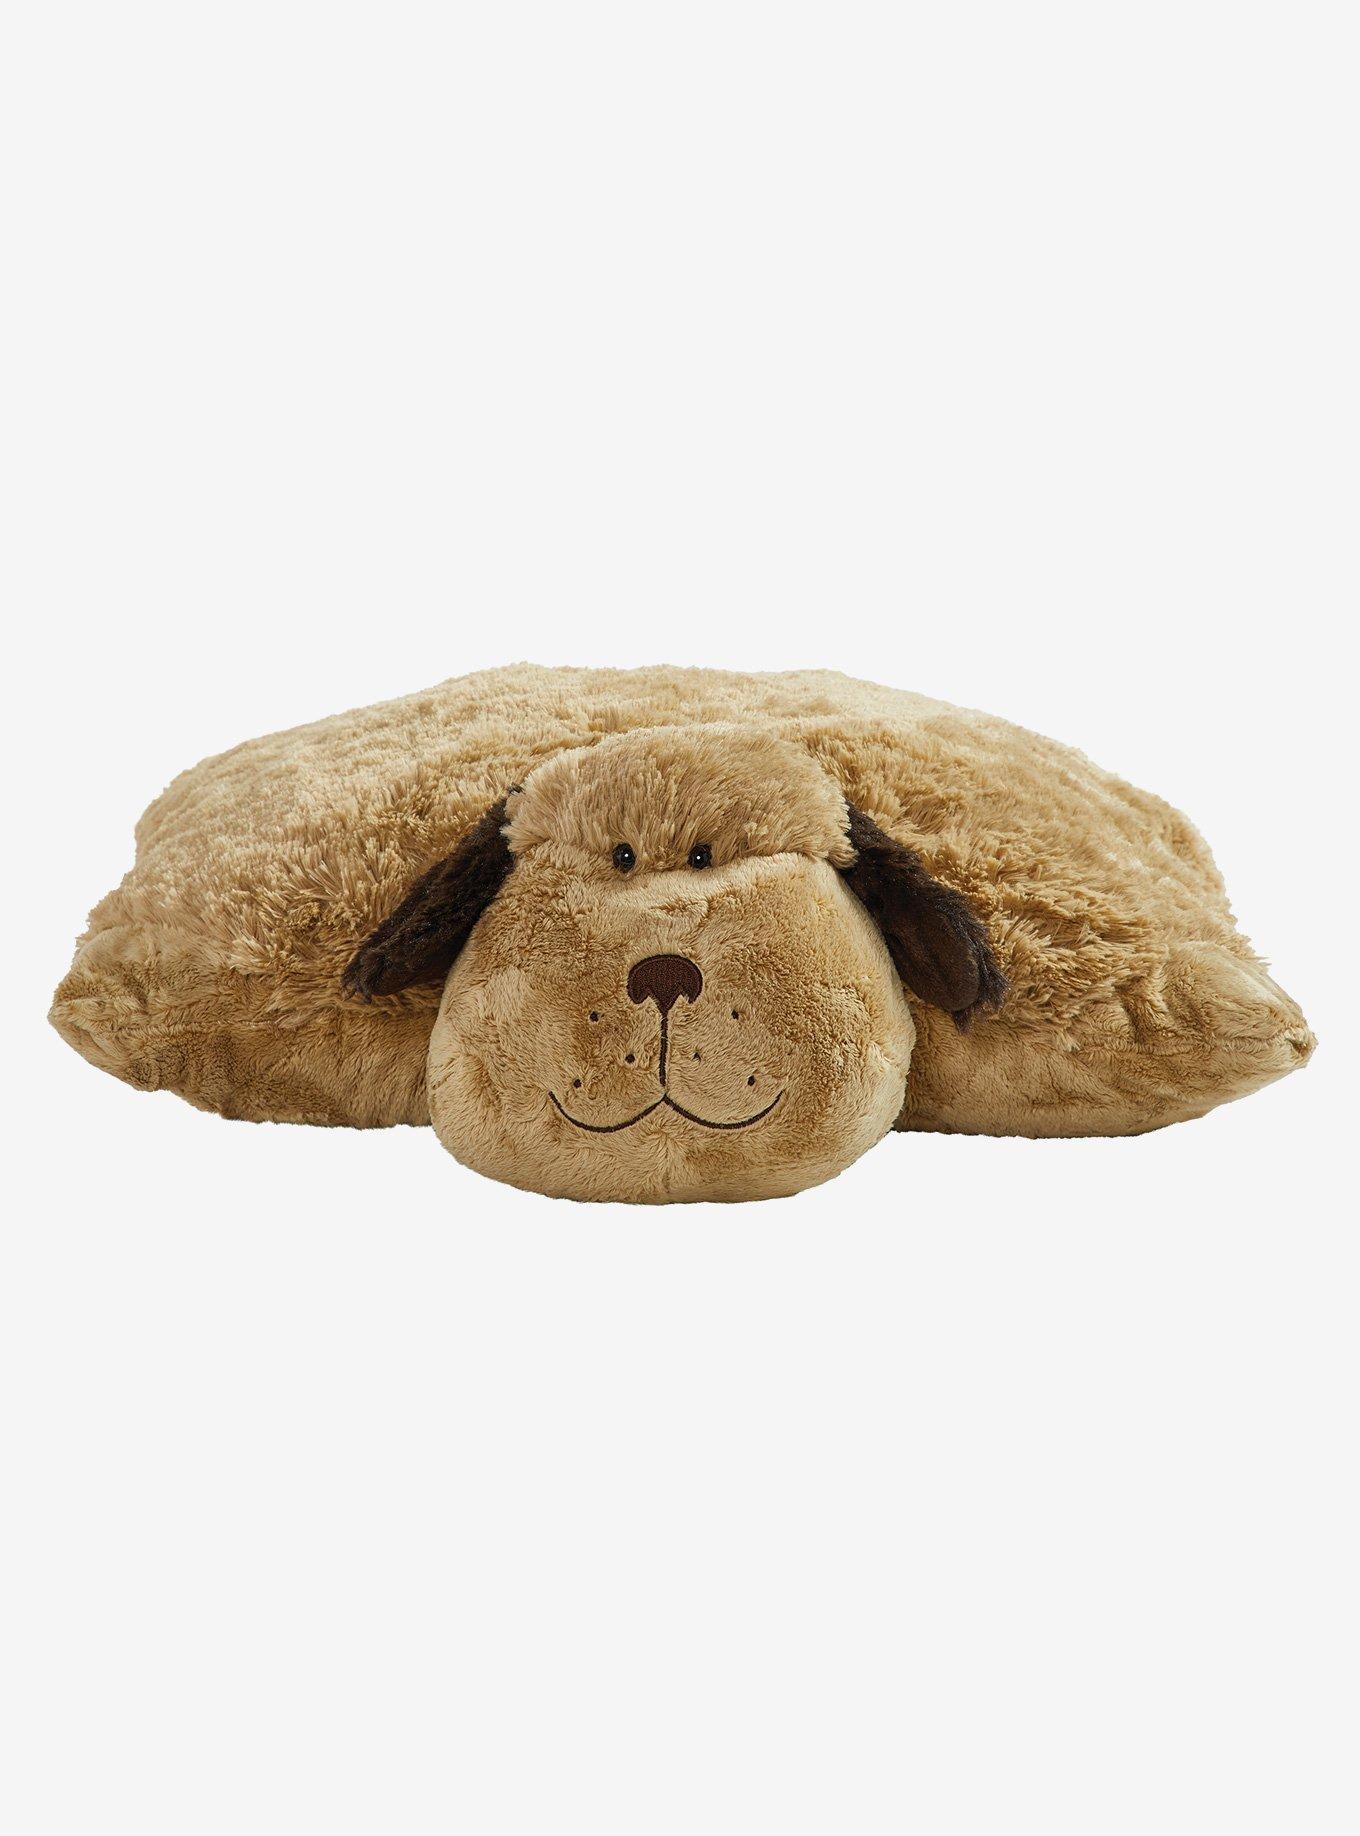 Snuggly Puppy Pillow Pets Plush Toy, , hi-res